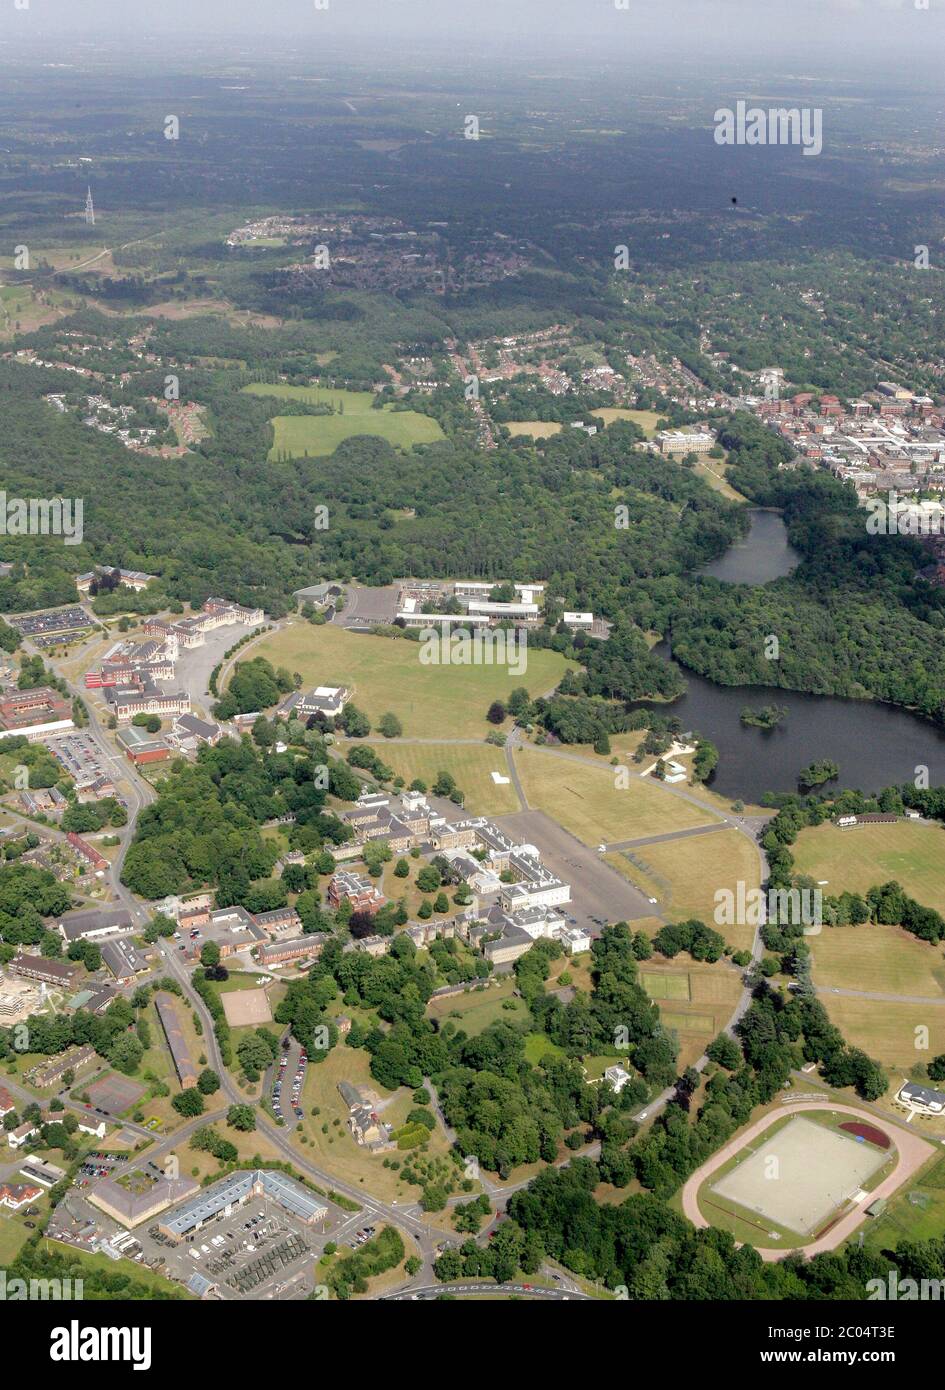 Royal Military Academy Sandhurst. The British Army's initial officer training centre in the United Kingdom. The Academy is located in the Berkshire to Stock Photo